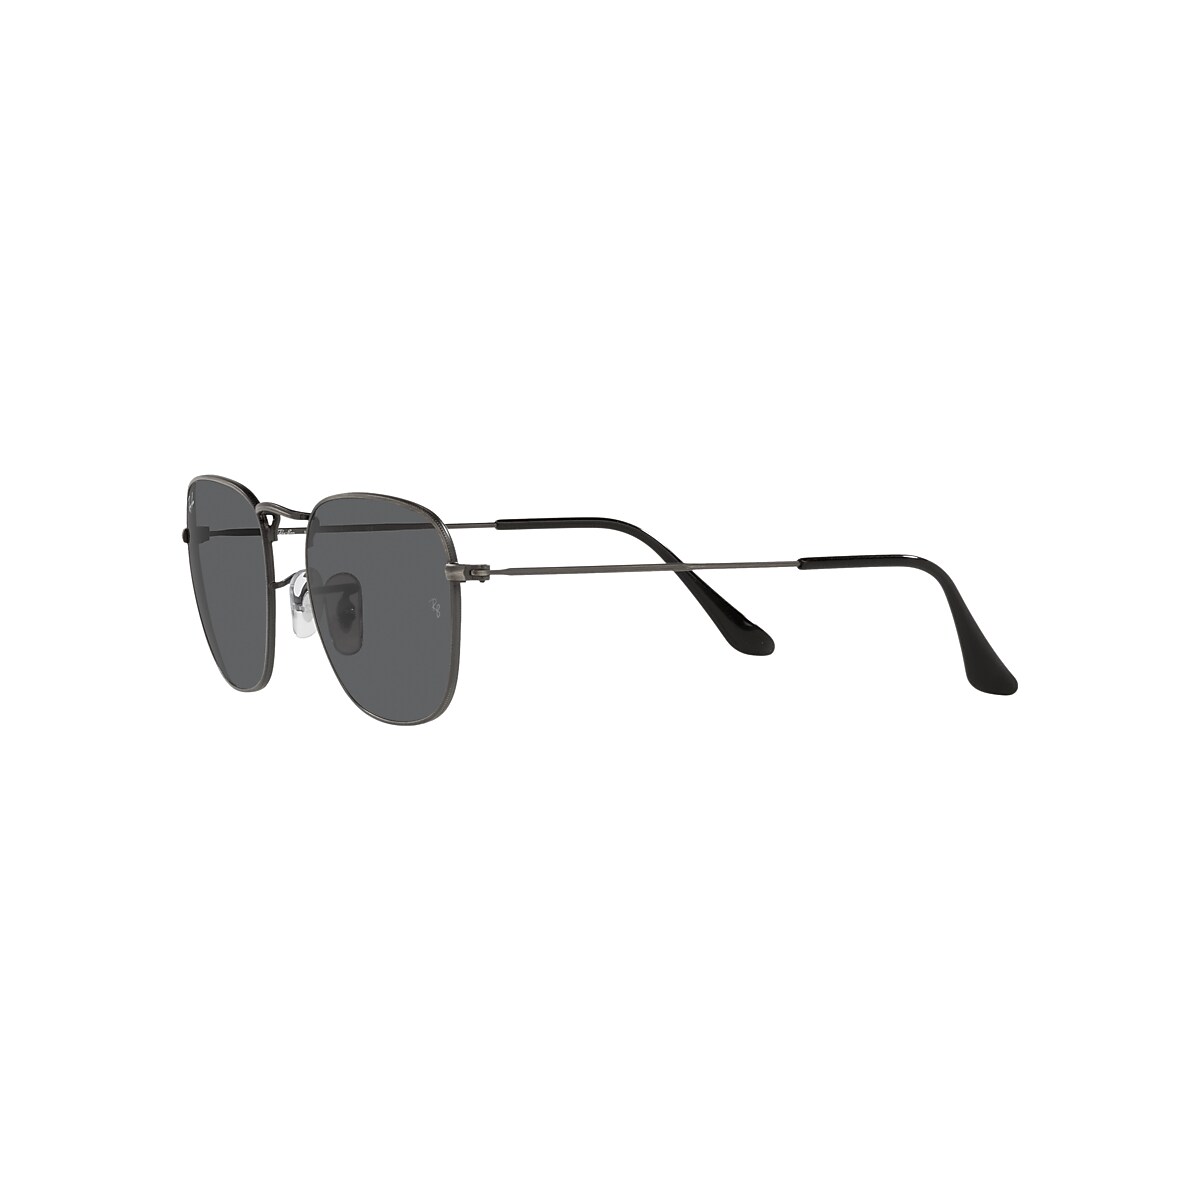 FRANK ANTIQUED Sunglasses in Gunmetal and Dark Grey - RB3857 | Ray